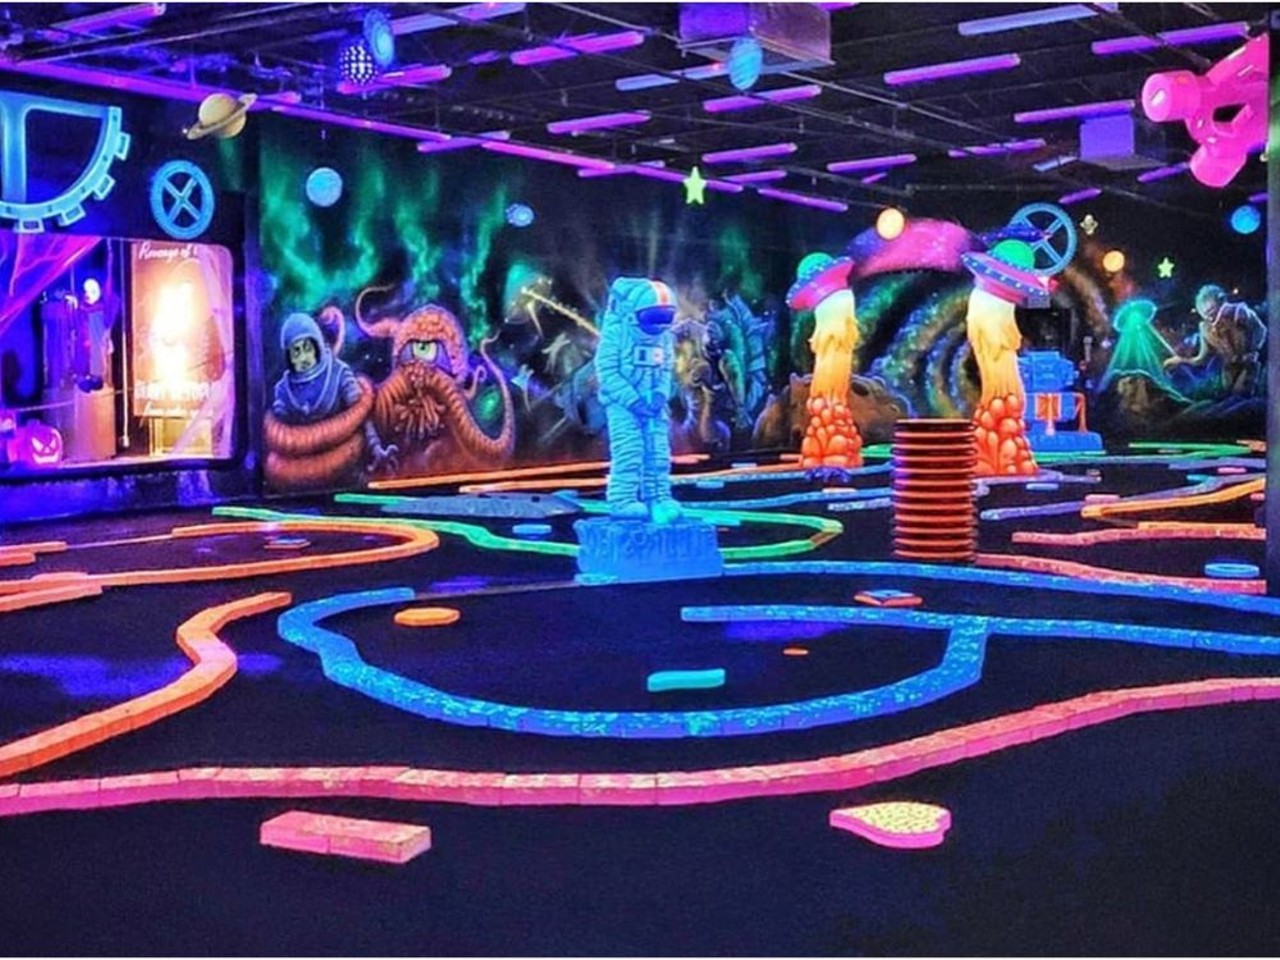 Cosmic Mayhem Blacklight Mini Golf and Bar
Cosmic Mayhem feels like you fell down the rabbit hole into Wonderland, but if the Mad Hatter and company were more into mini golf than tea parties. This indoor blacklight mini golf joint offers an 18-hole indoor course, virtual reality games, an arcade and axe-throwing. A fun choice for first dates or family time.903 E. Bitters Road, Suite 310, (210) 437-1072, cosmicmayhem.com.